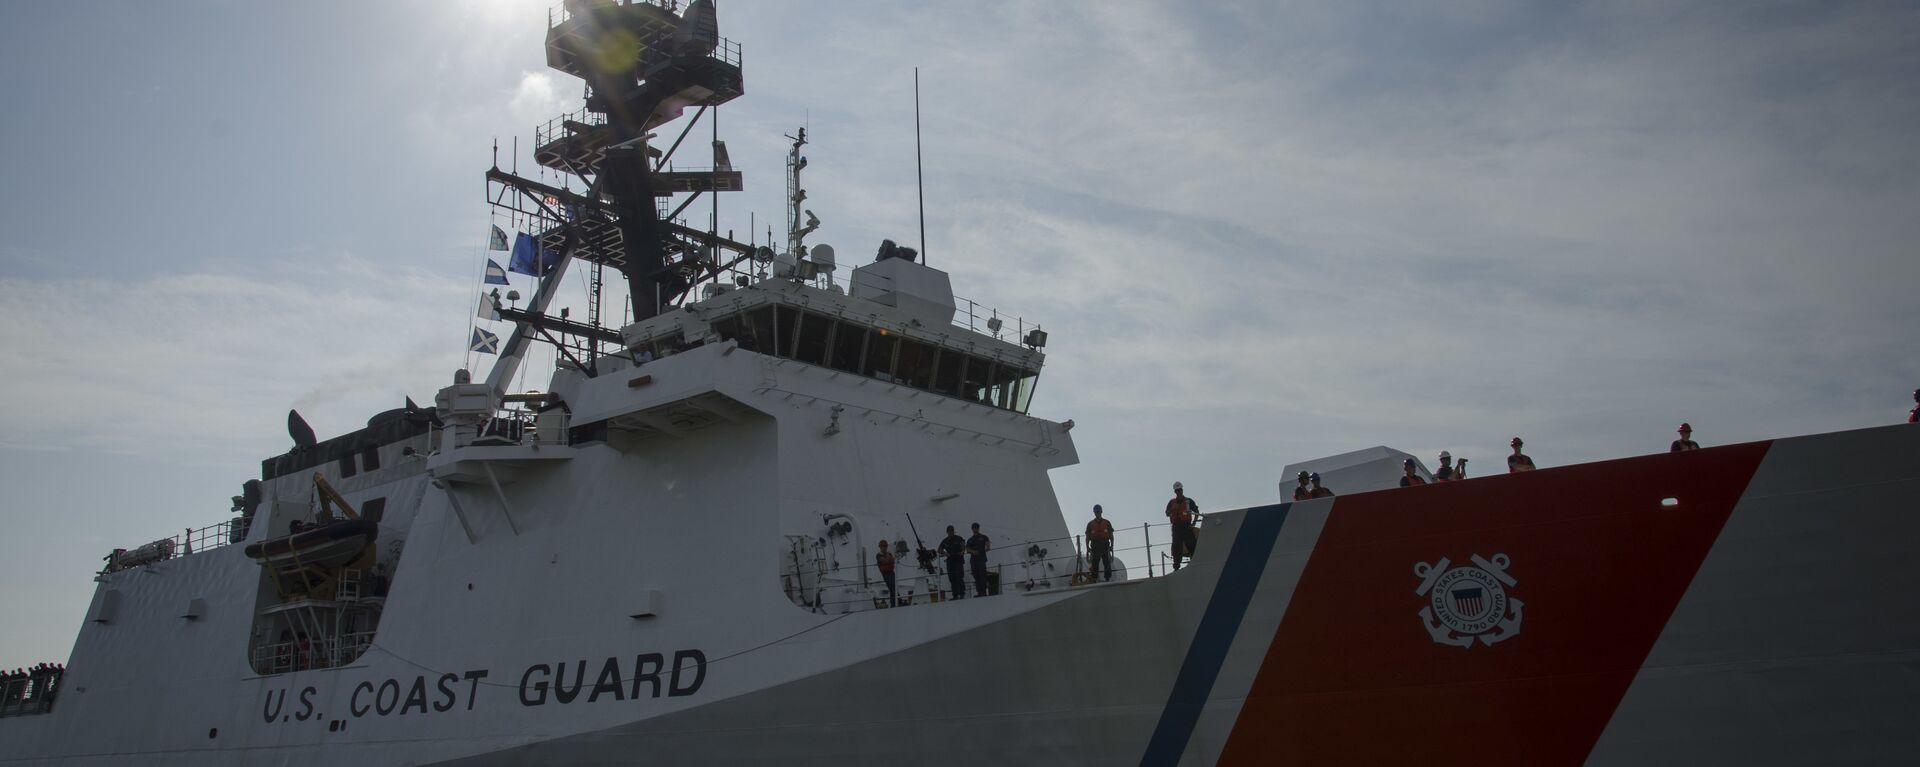 The United States Coast Guard Cutter James, the second National Security Cutter for the East Coast, arrived Aug. 28, 2015 in its homeport in Charleston, S.C. - Sputnik International, 1920, 12.01.2022